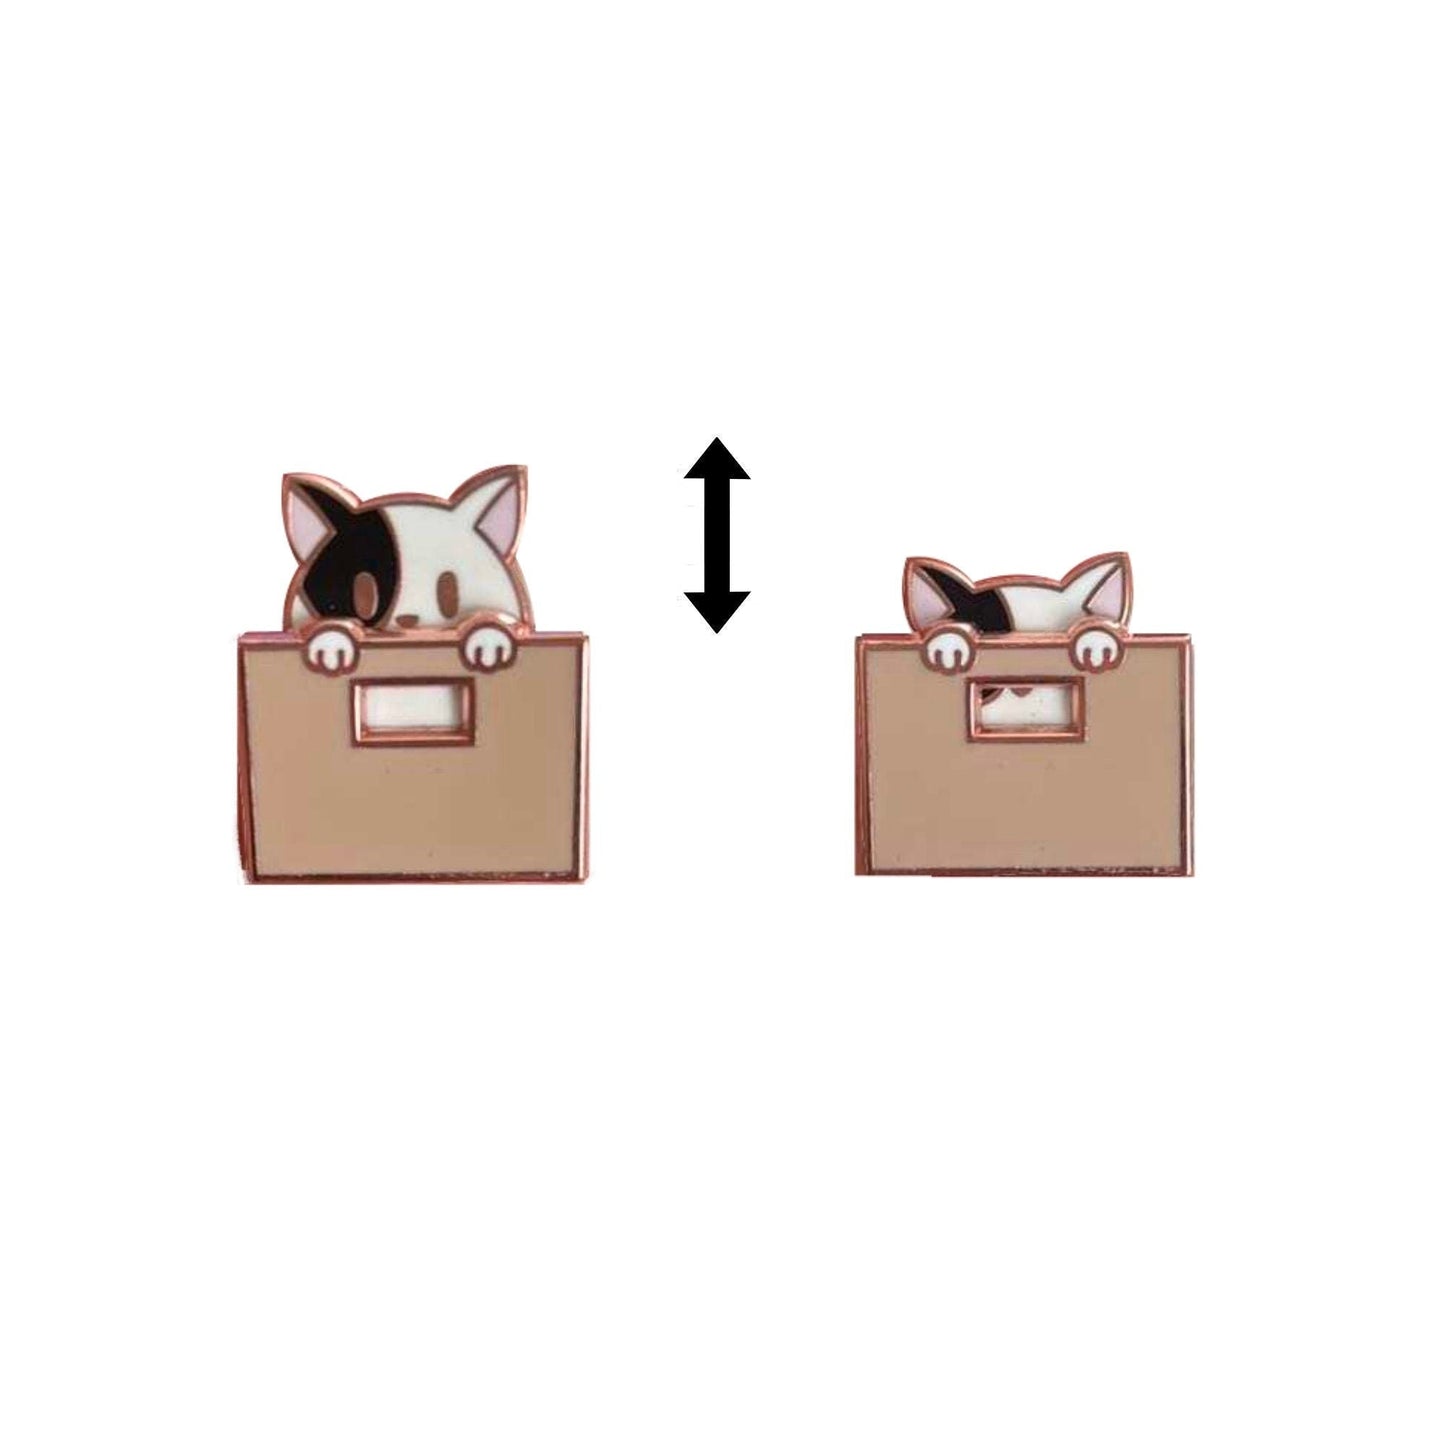 Interactive Slider Enamel Pin - Kitty-in-a-Box Collection, Peekaboo Cat, Pins, Brooches & Lapel Pins